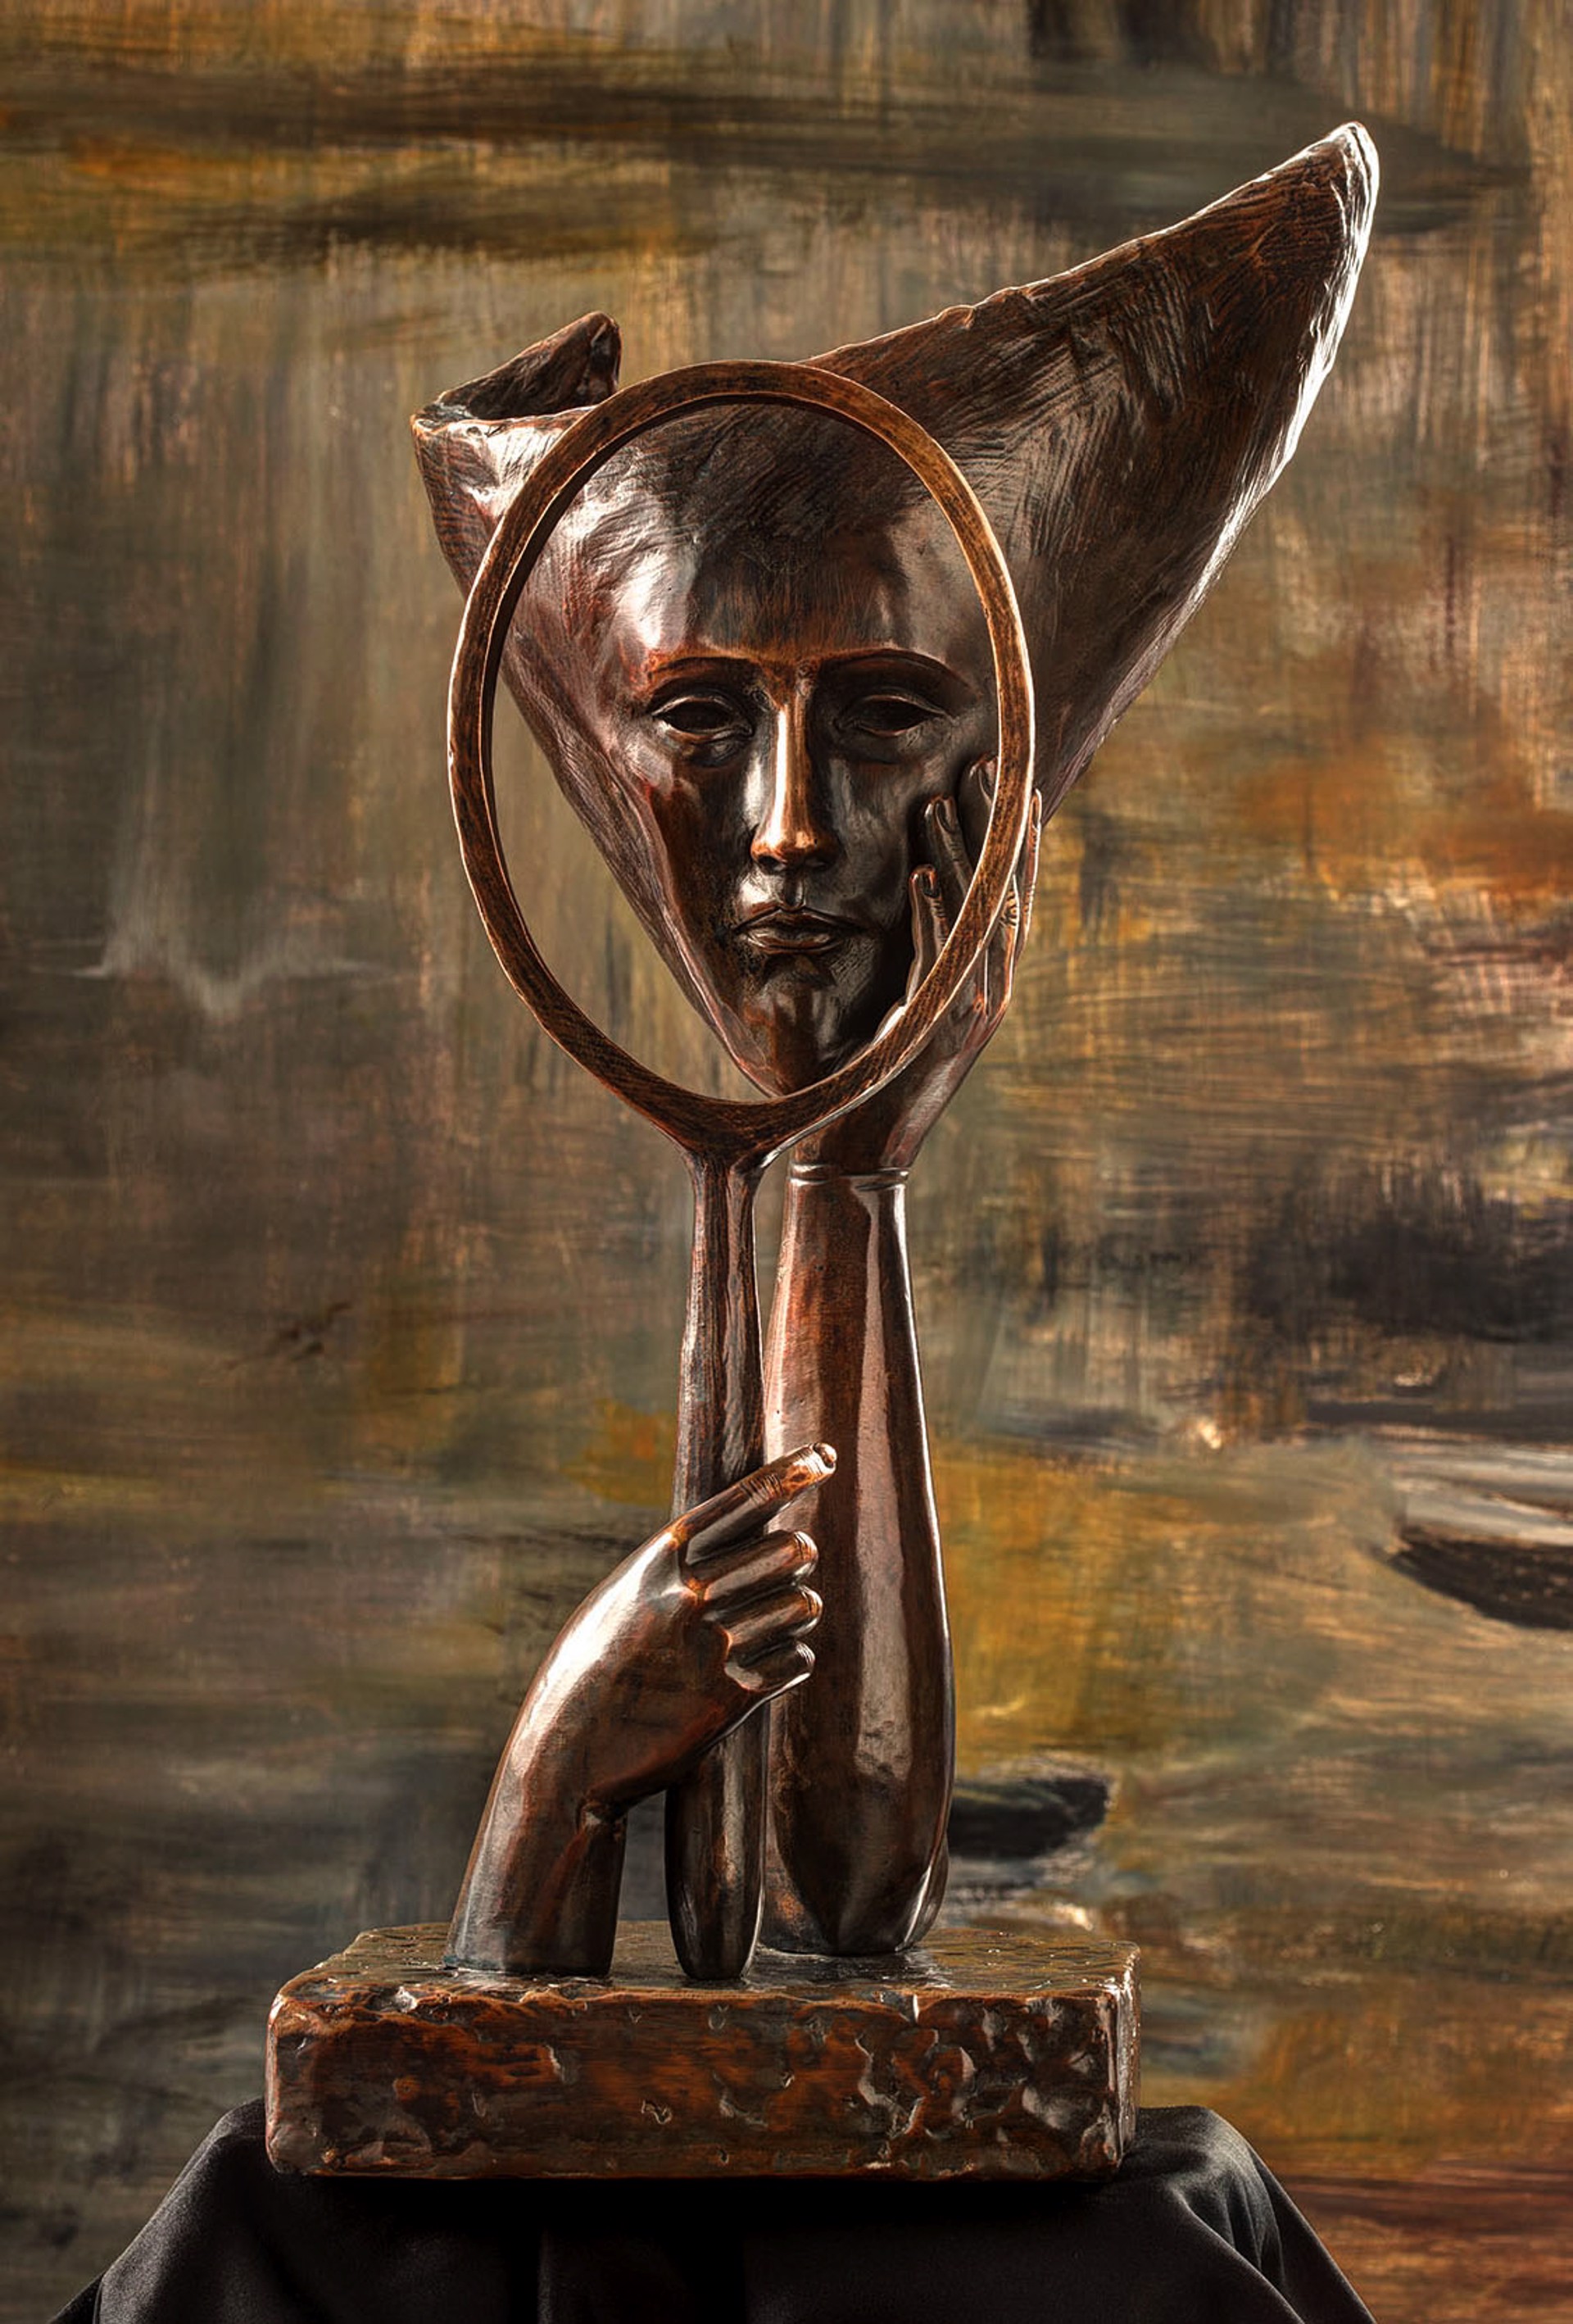 The Mirrors are the Others by Sergio Bustamante (sculptor)